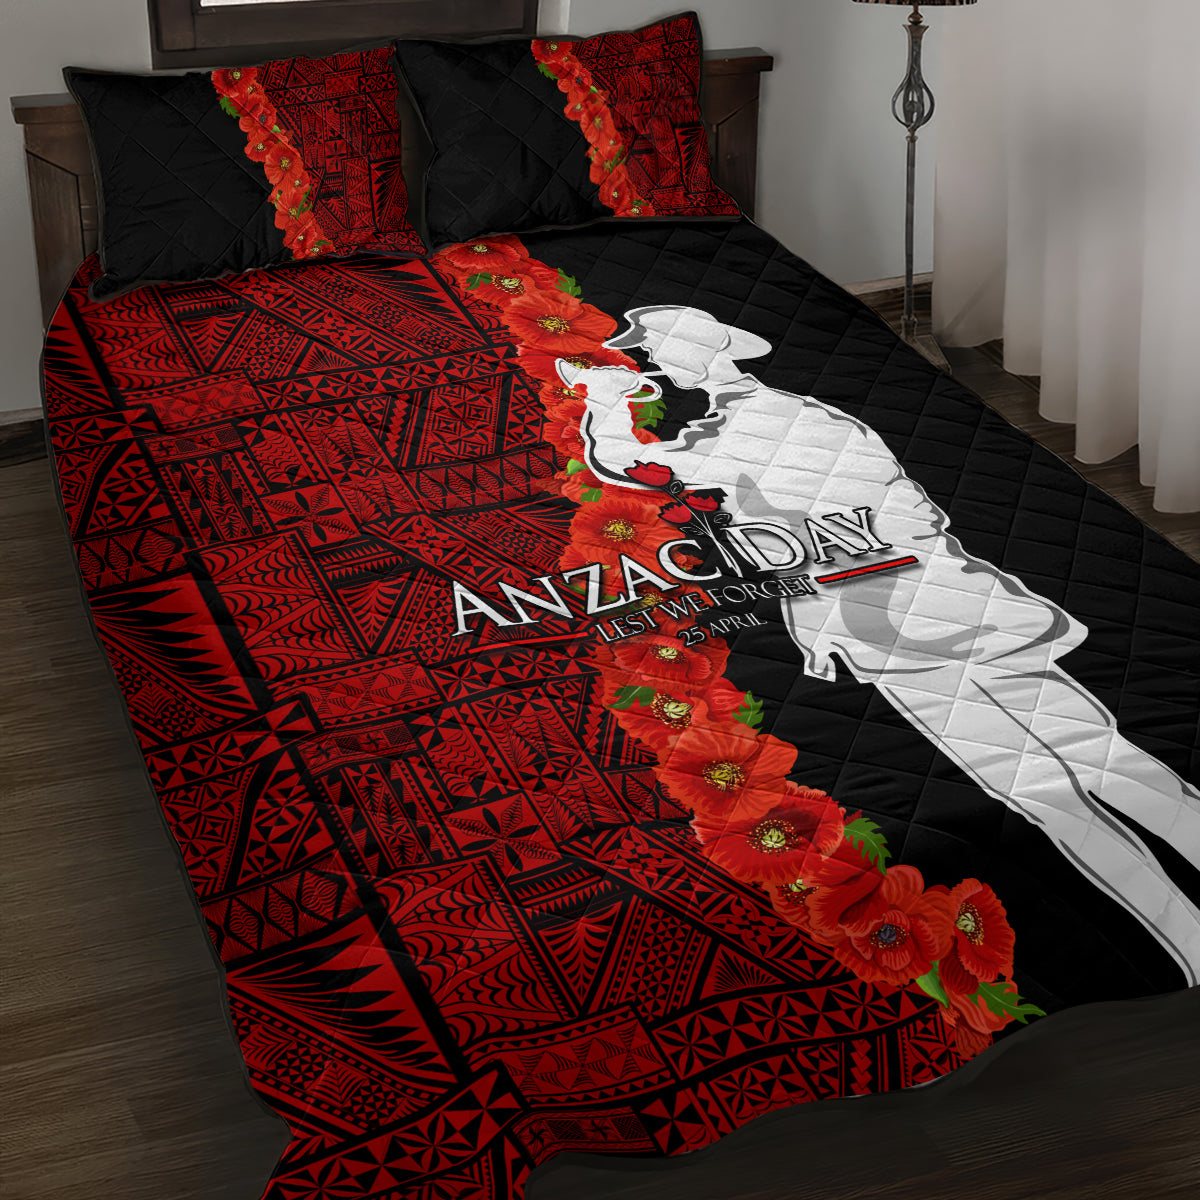 Tonga ANZAC Day Quilt Bed Set Red Poppies Flower Soldier Lest We Forget LT03 Red - Polynesian Pride